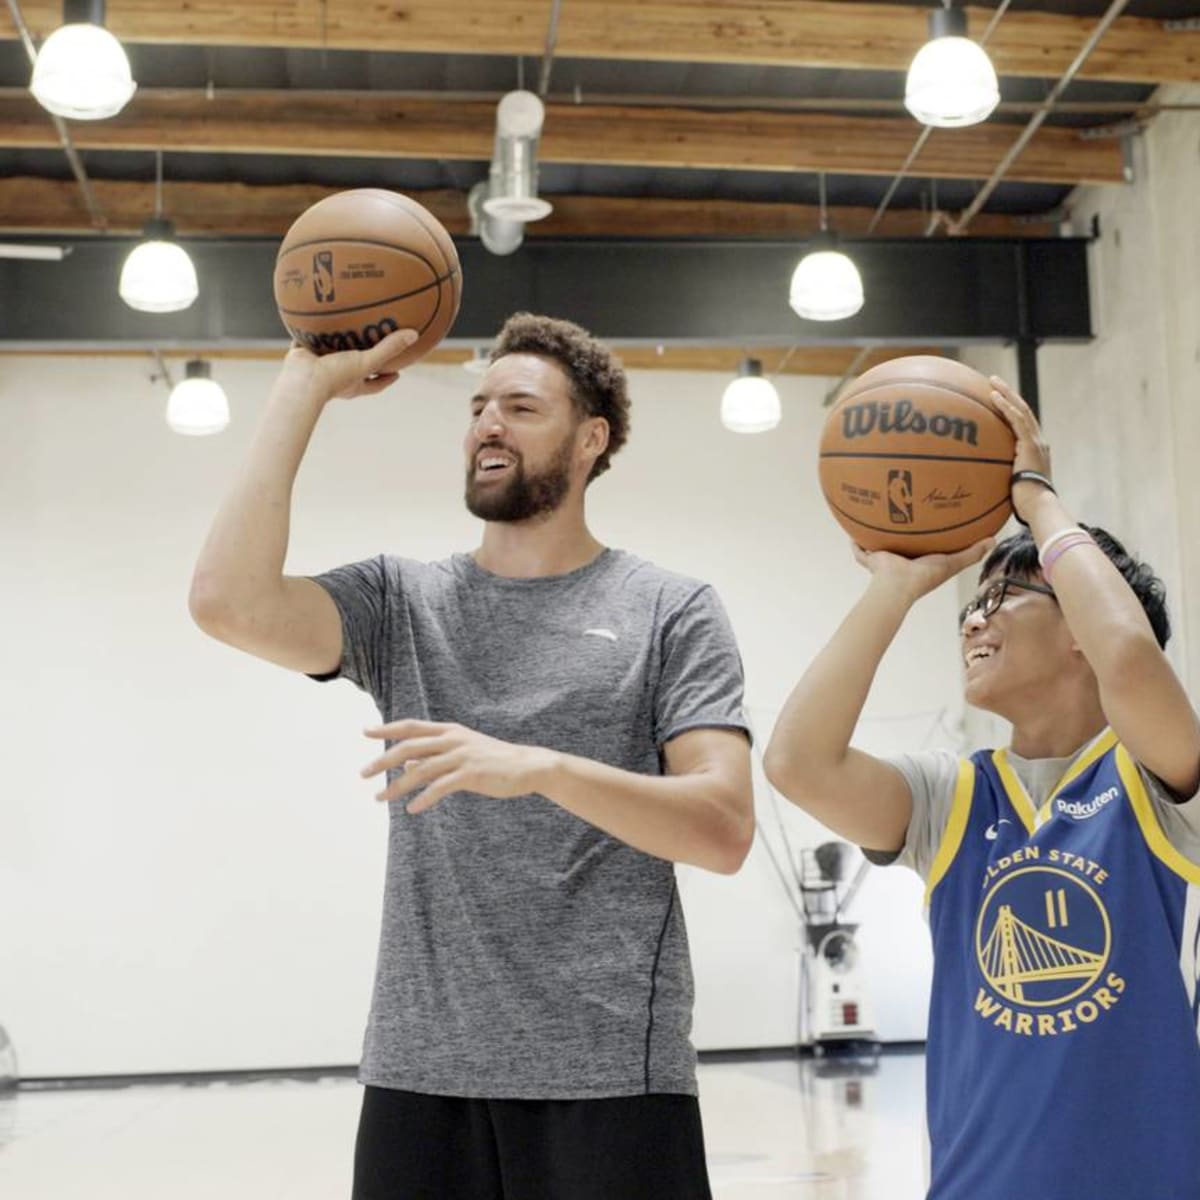 Warriors troll Klay Thompson with new jersey after NBA 75 snub